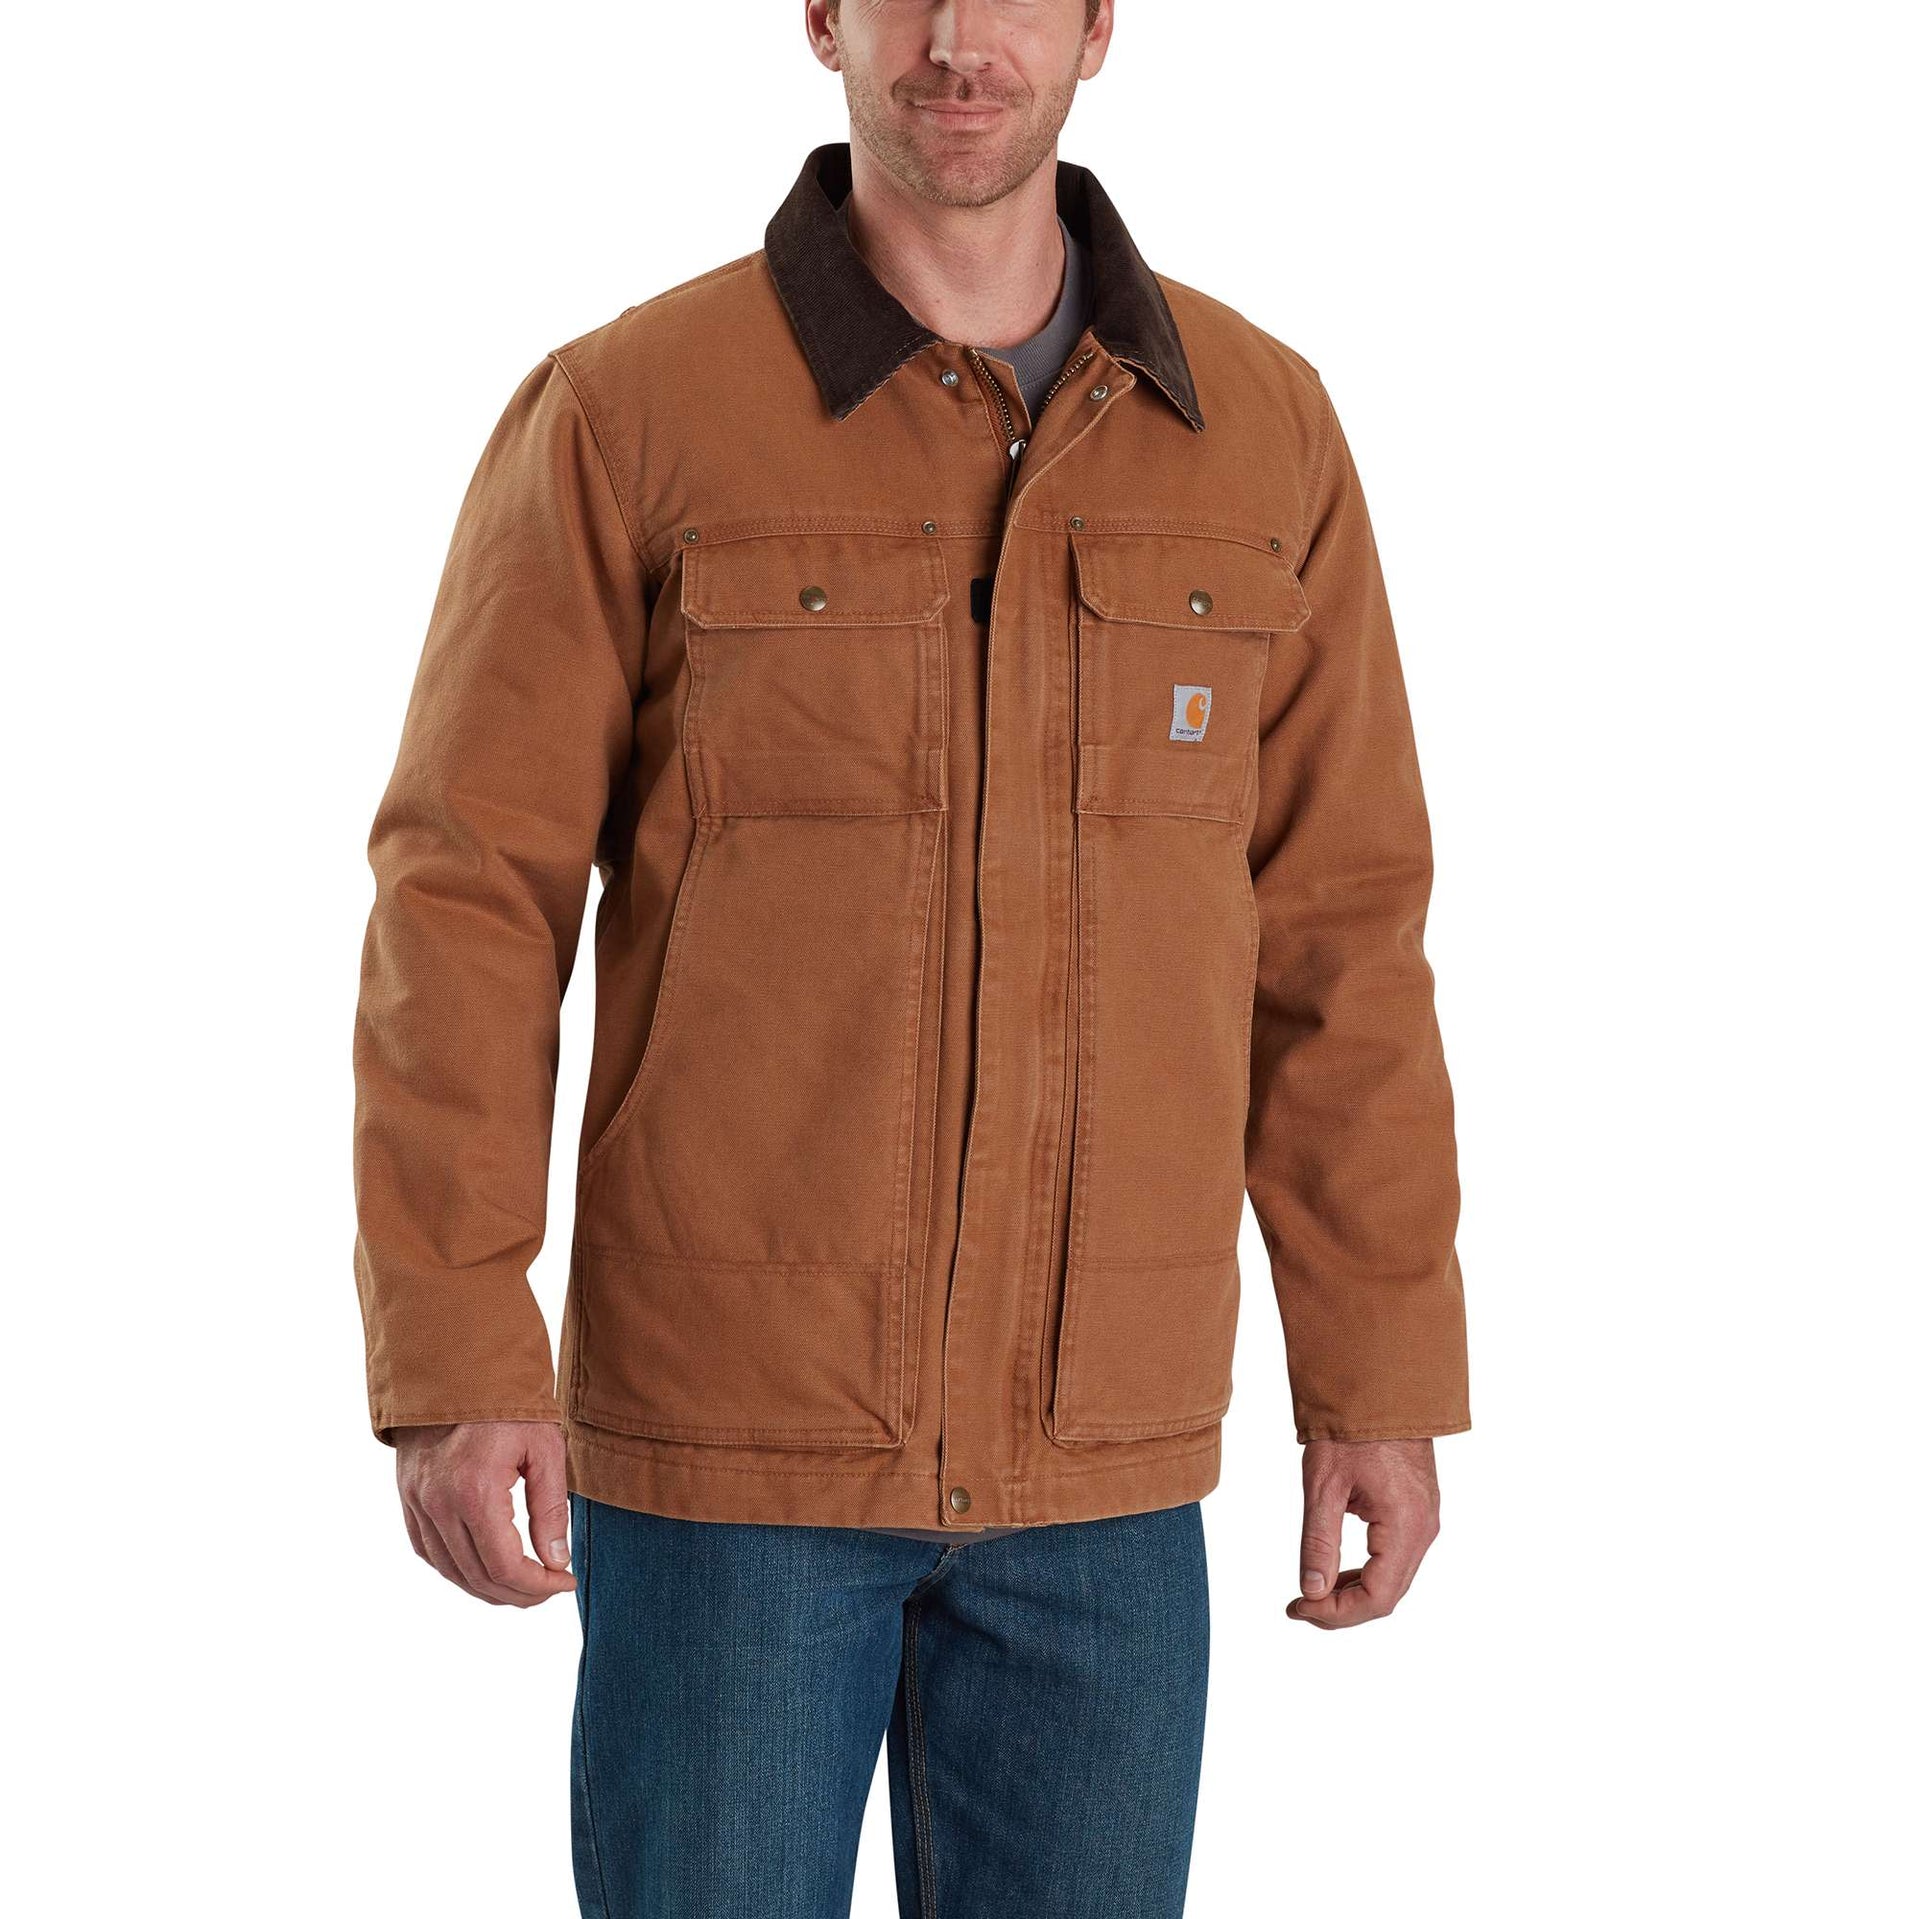 Full Swing® Loose Fit Quick Duck Insulated Jacket - 3 Warmest Rating, Washed Duck Gear